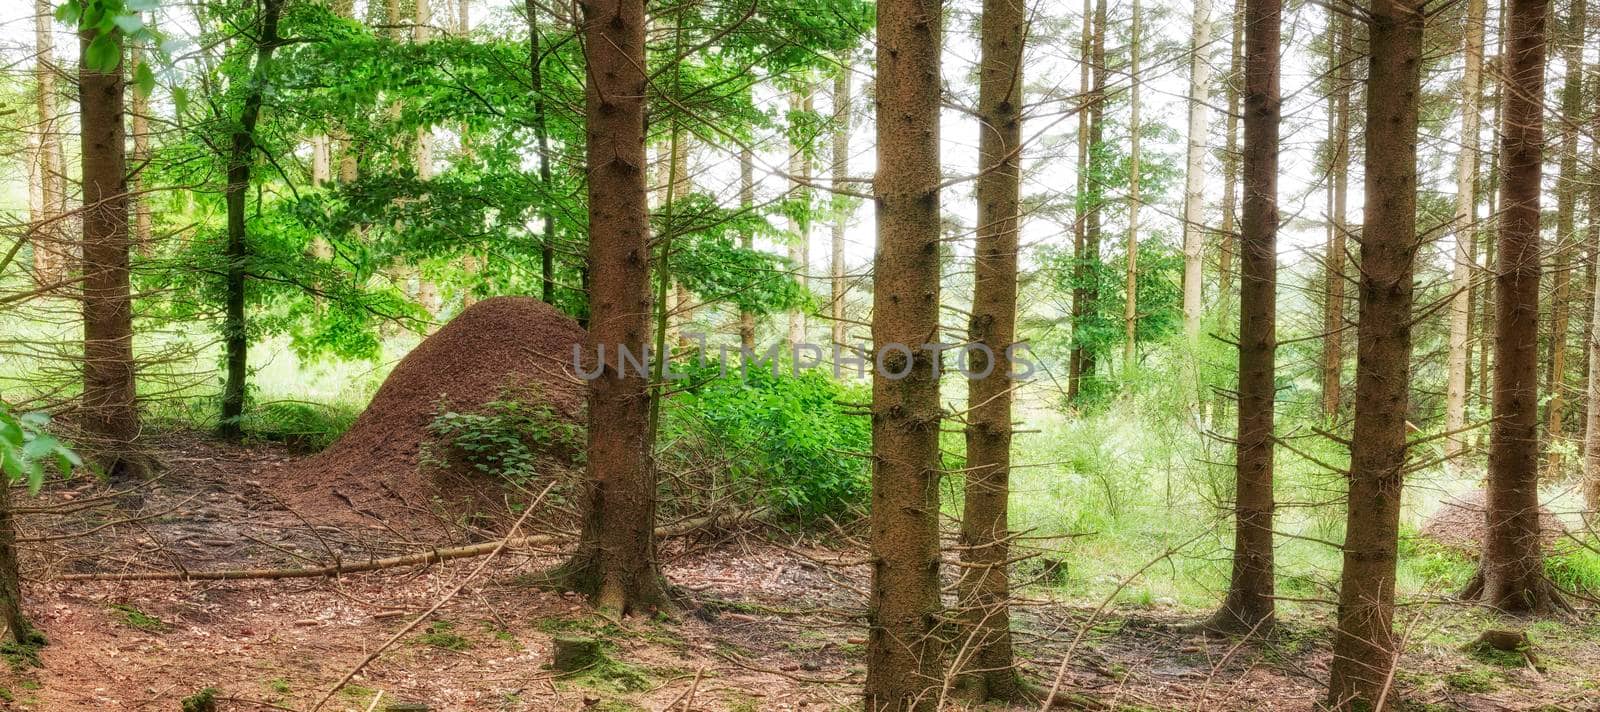 Huge anthill in a pine forest. Huge anthill in pine forest, Denmark